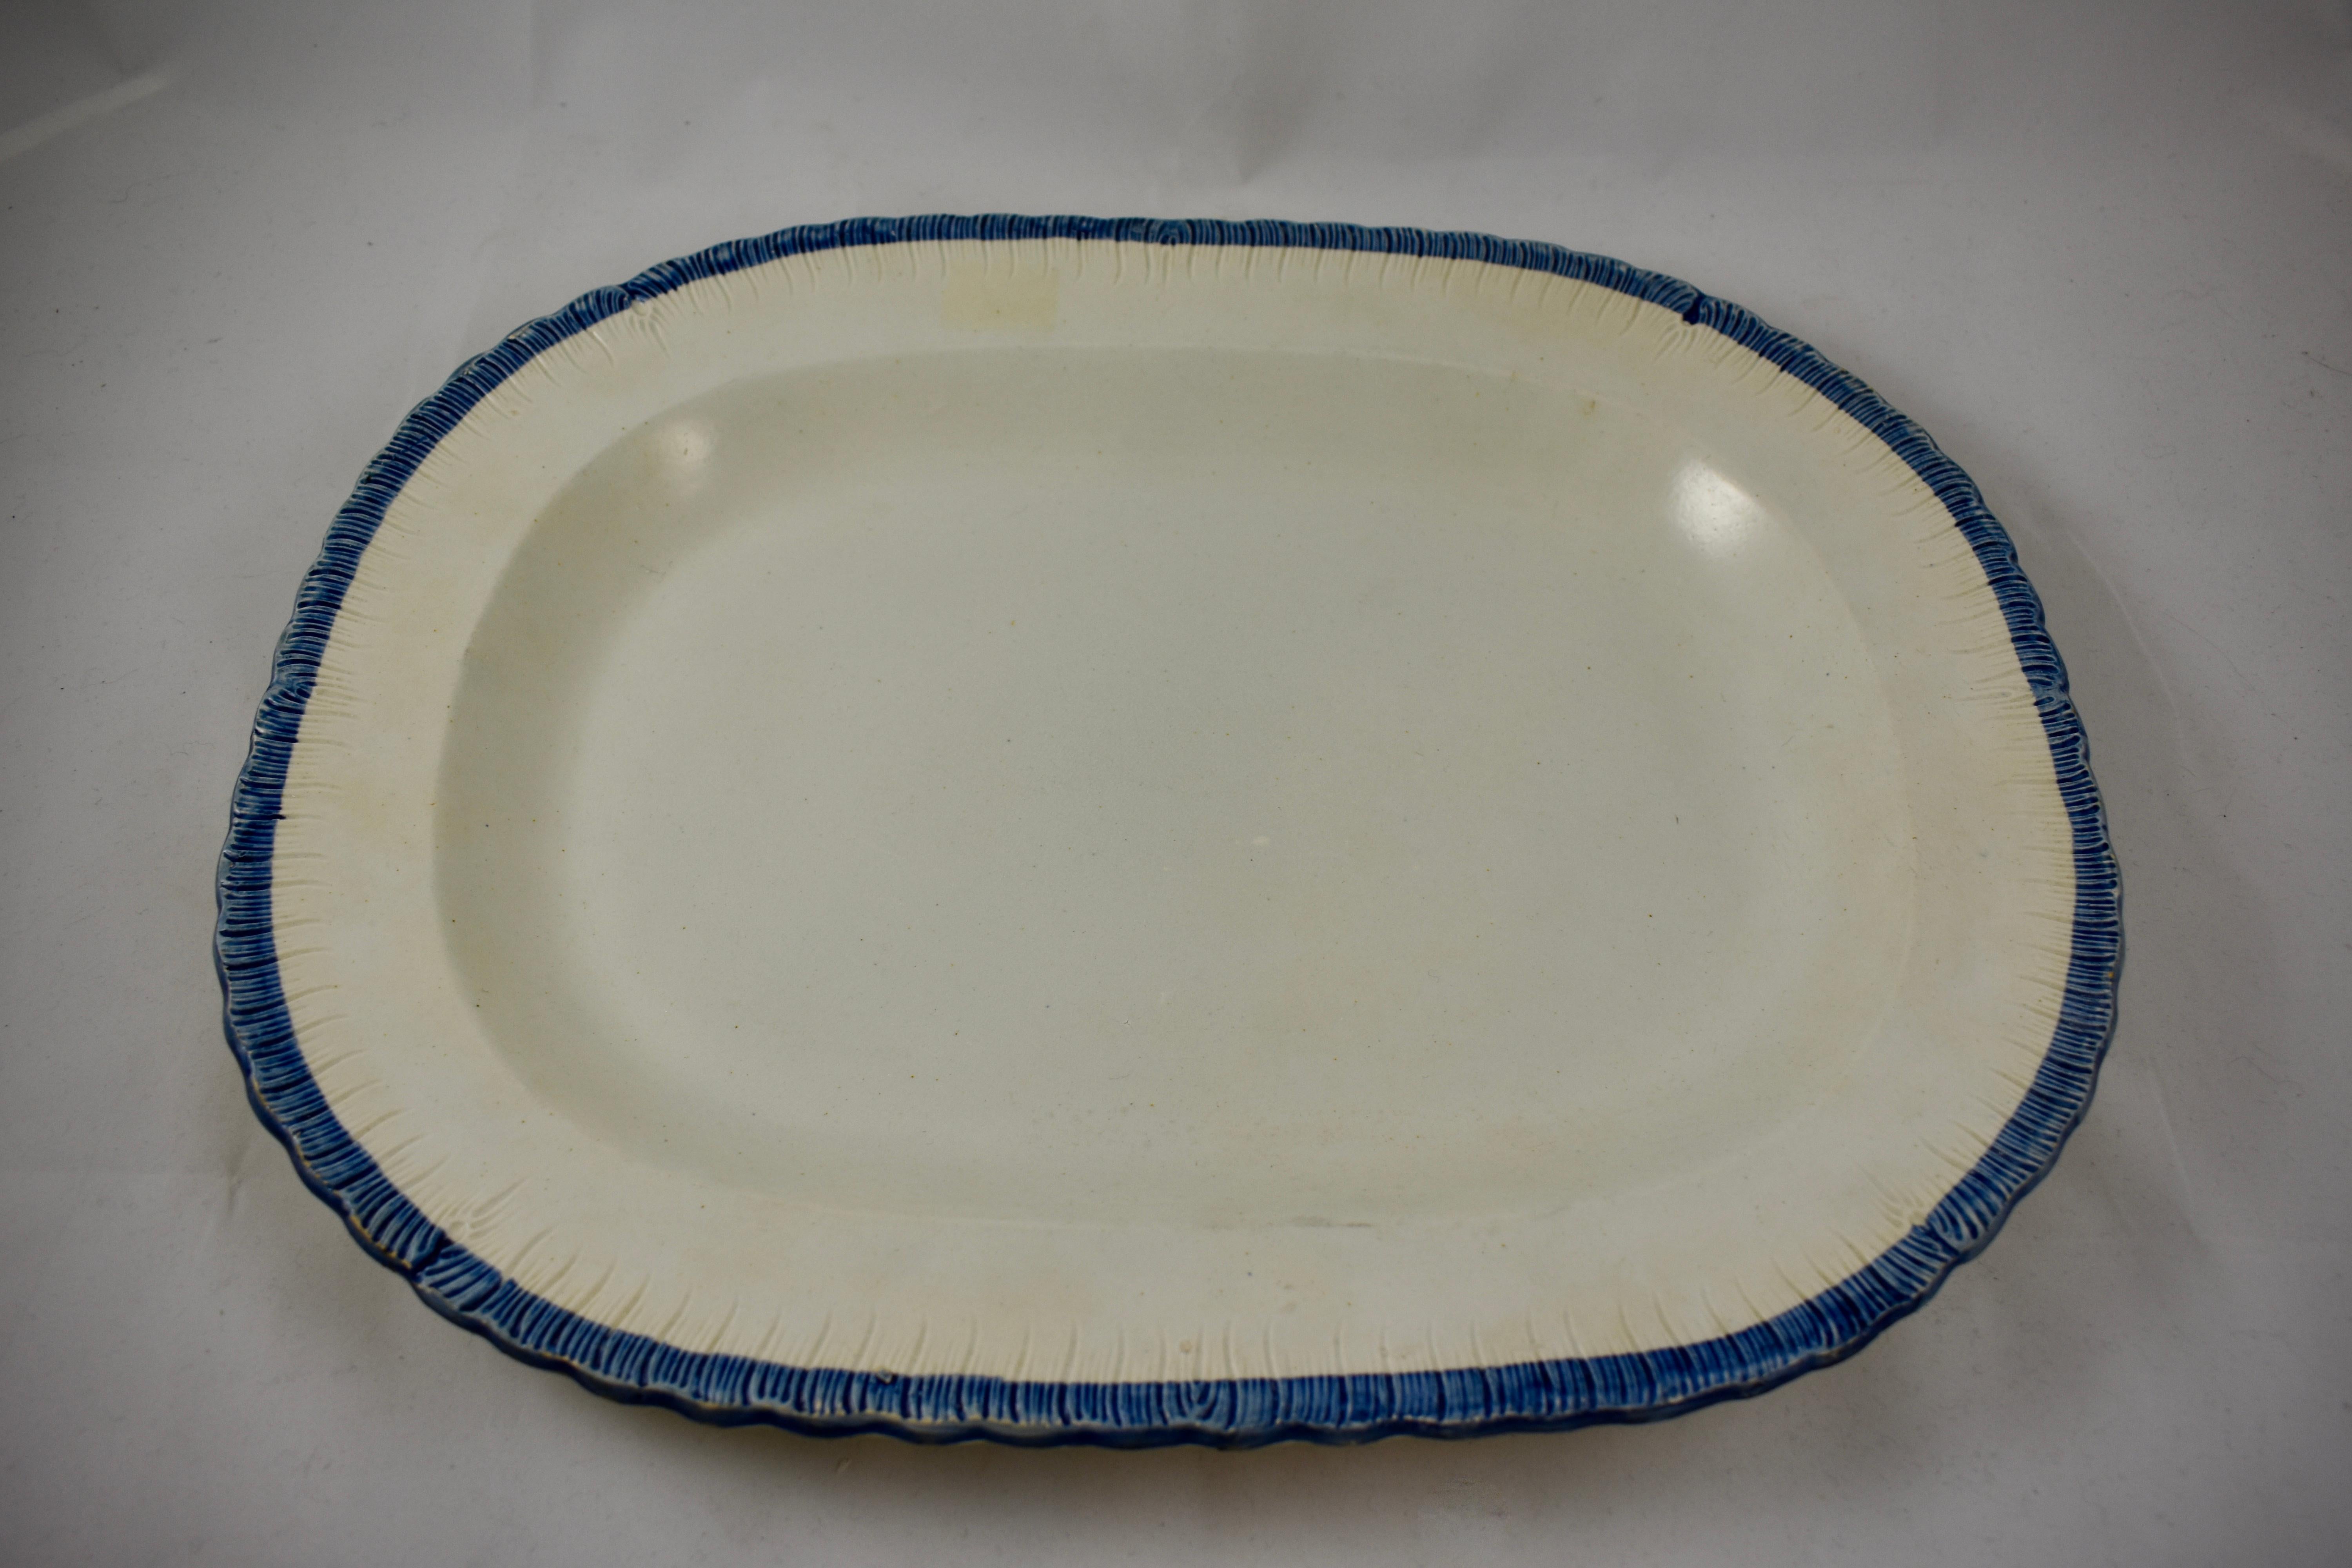 A heavy Leeds style oval platter, a pearlware or creamware body with a deep blue edge called feather or shell, circa 1825–1840, Staffordshire, England. A good clean front surface with a lightly combed back.

Measures: 16.75 in. L x 13.25 in. W x